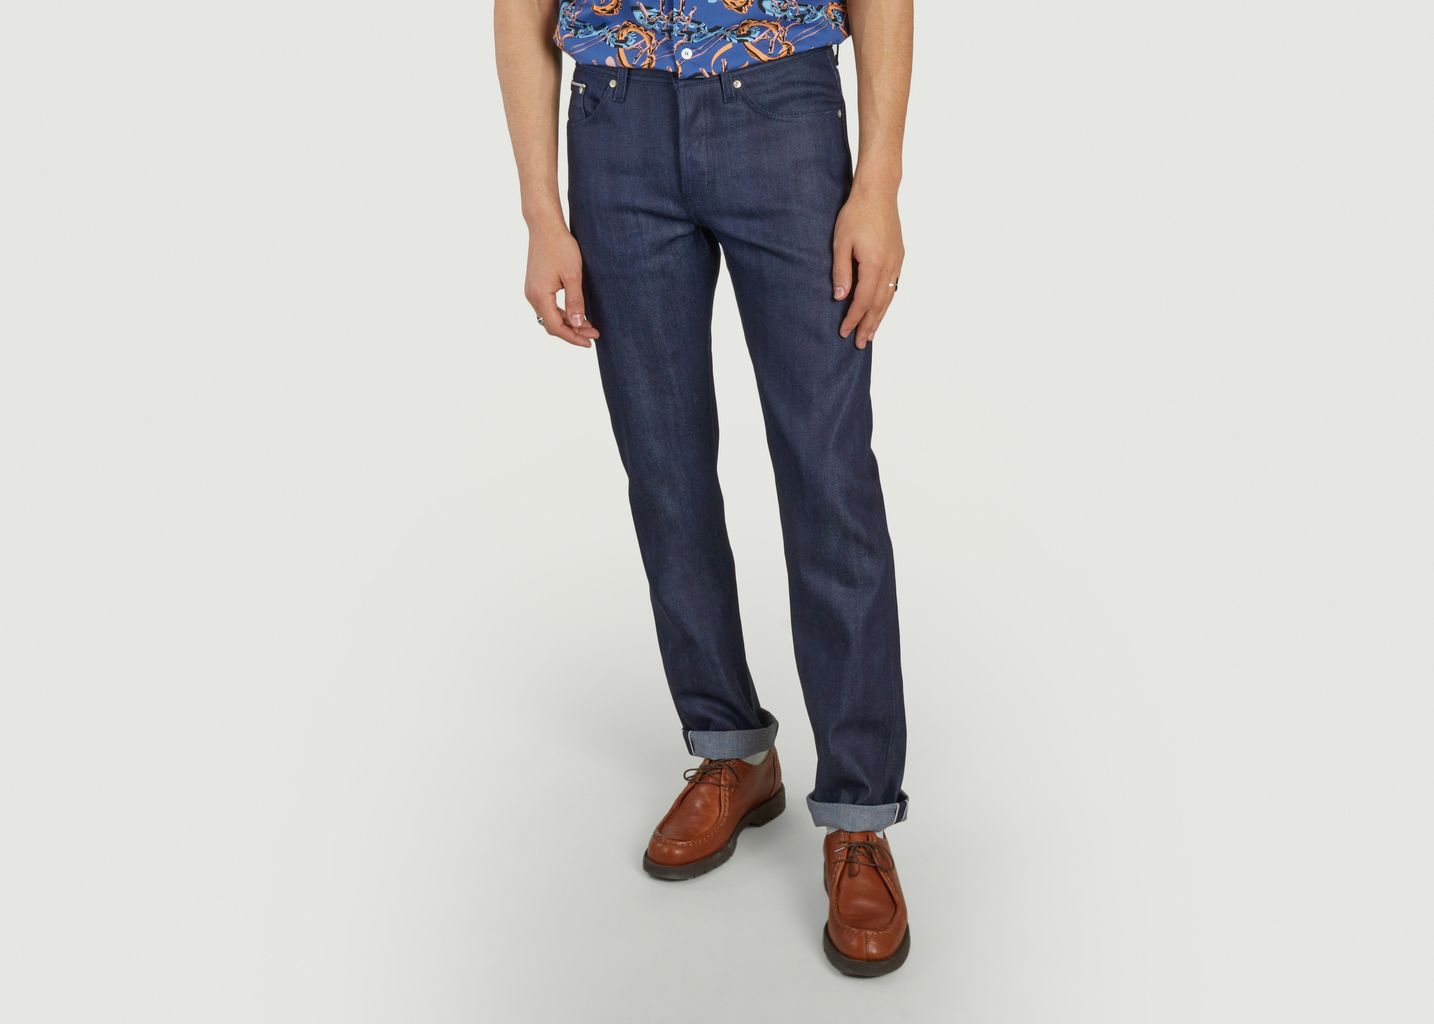 Jeans Weird Guy Spring Garden Selvedge - Naked and Famous